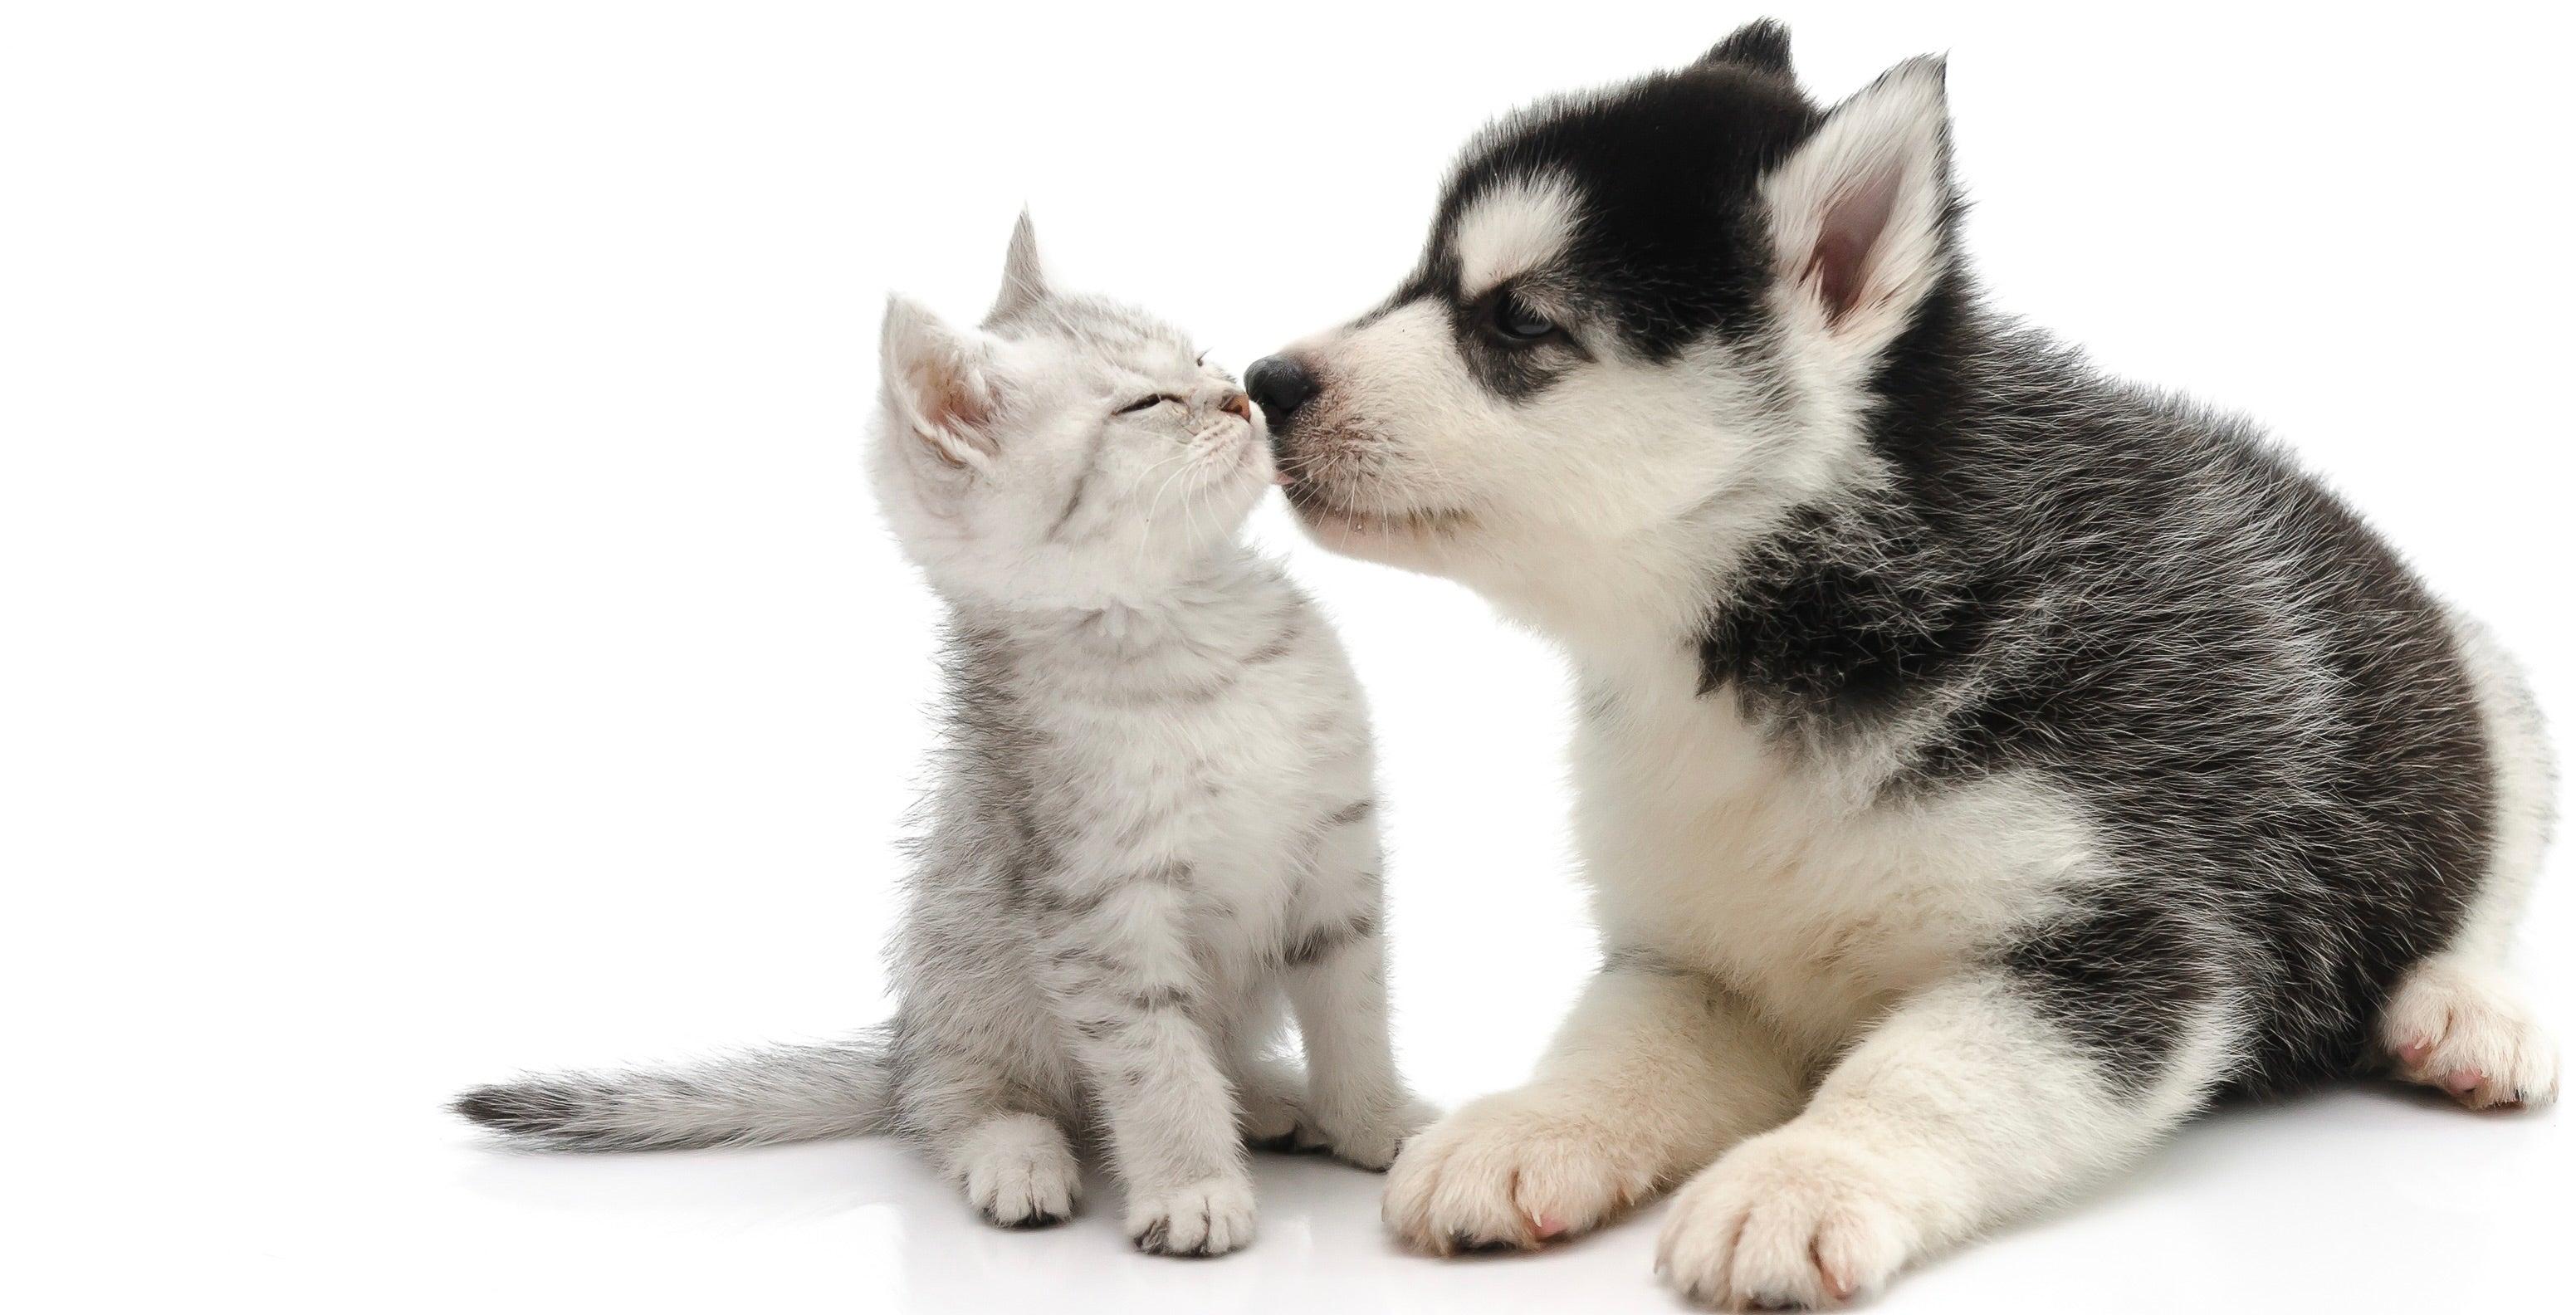 Puppy and kitten licking each other